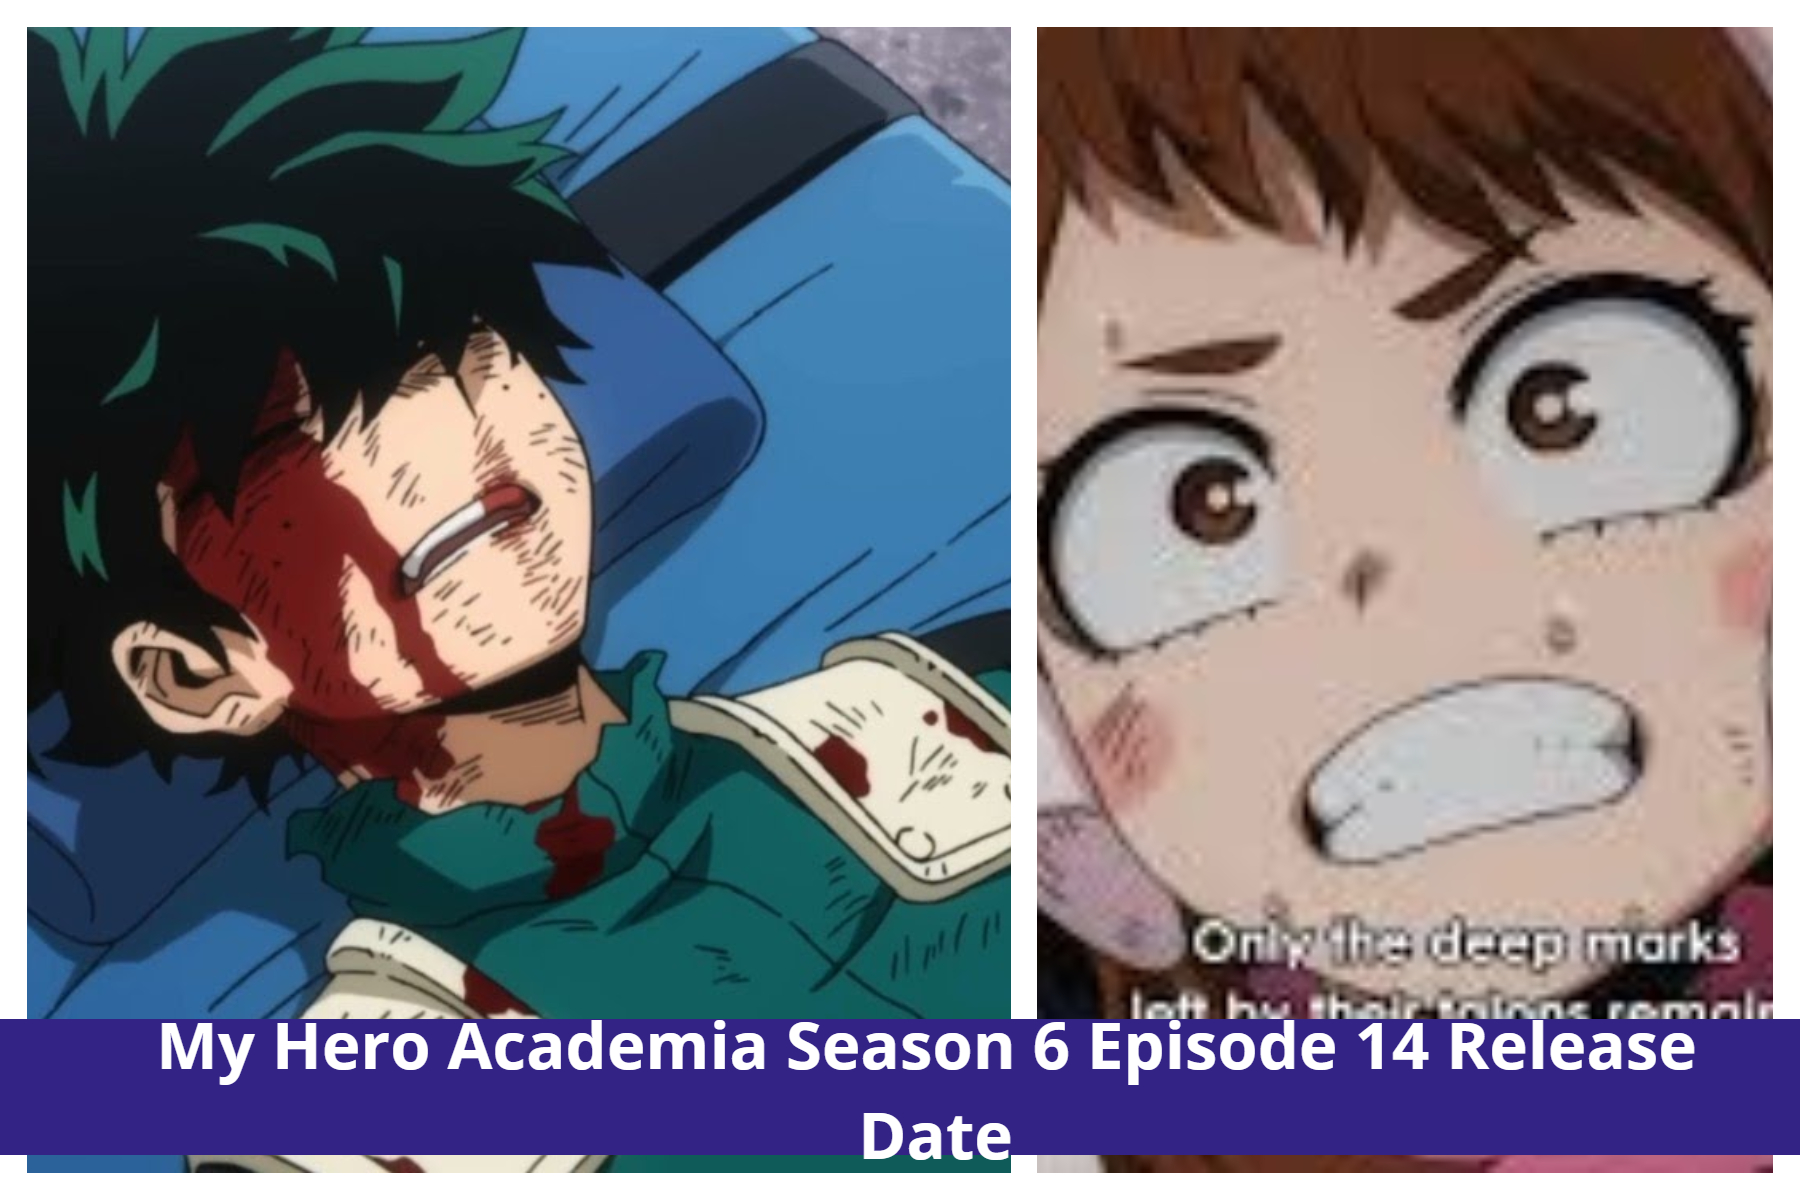 My Hero Academia Season 6 Episode 14: Citizens to lose trust in Heroes &  live in anxiety